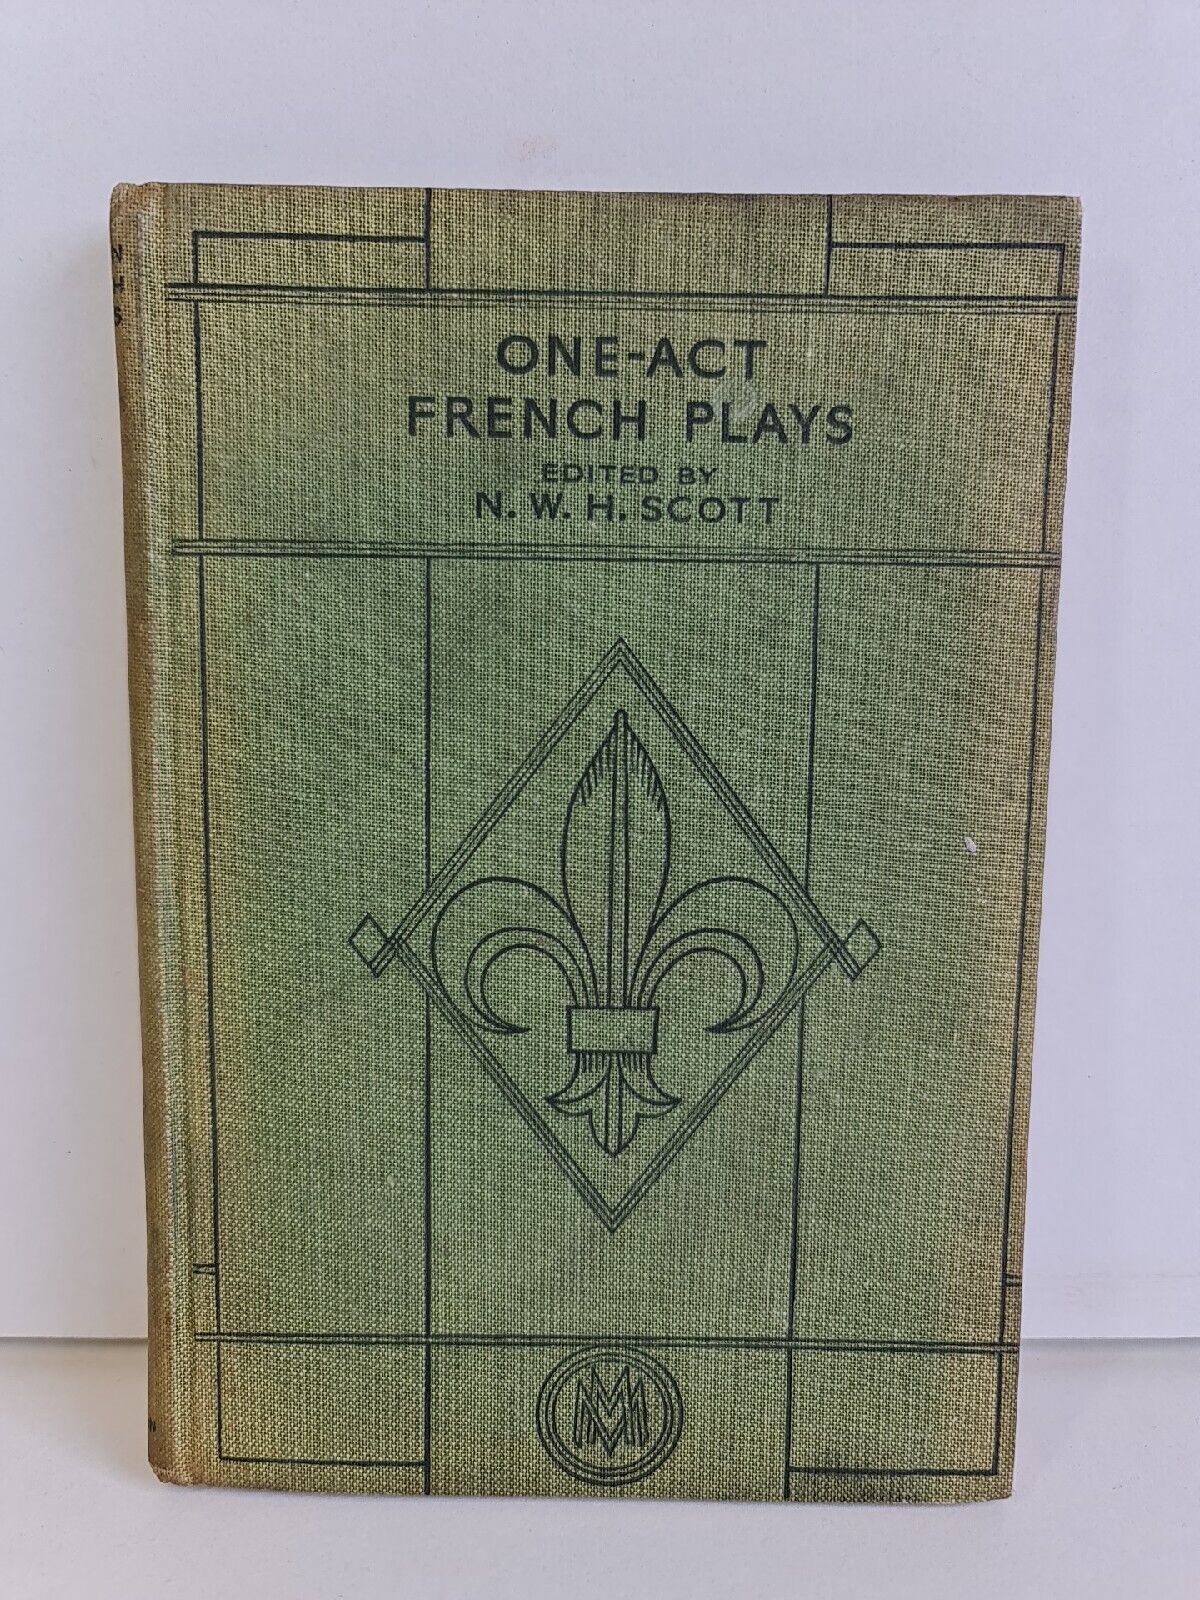 One-Act French Plays edited by N W H Scott (1938)